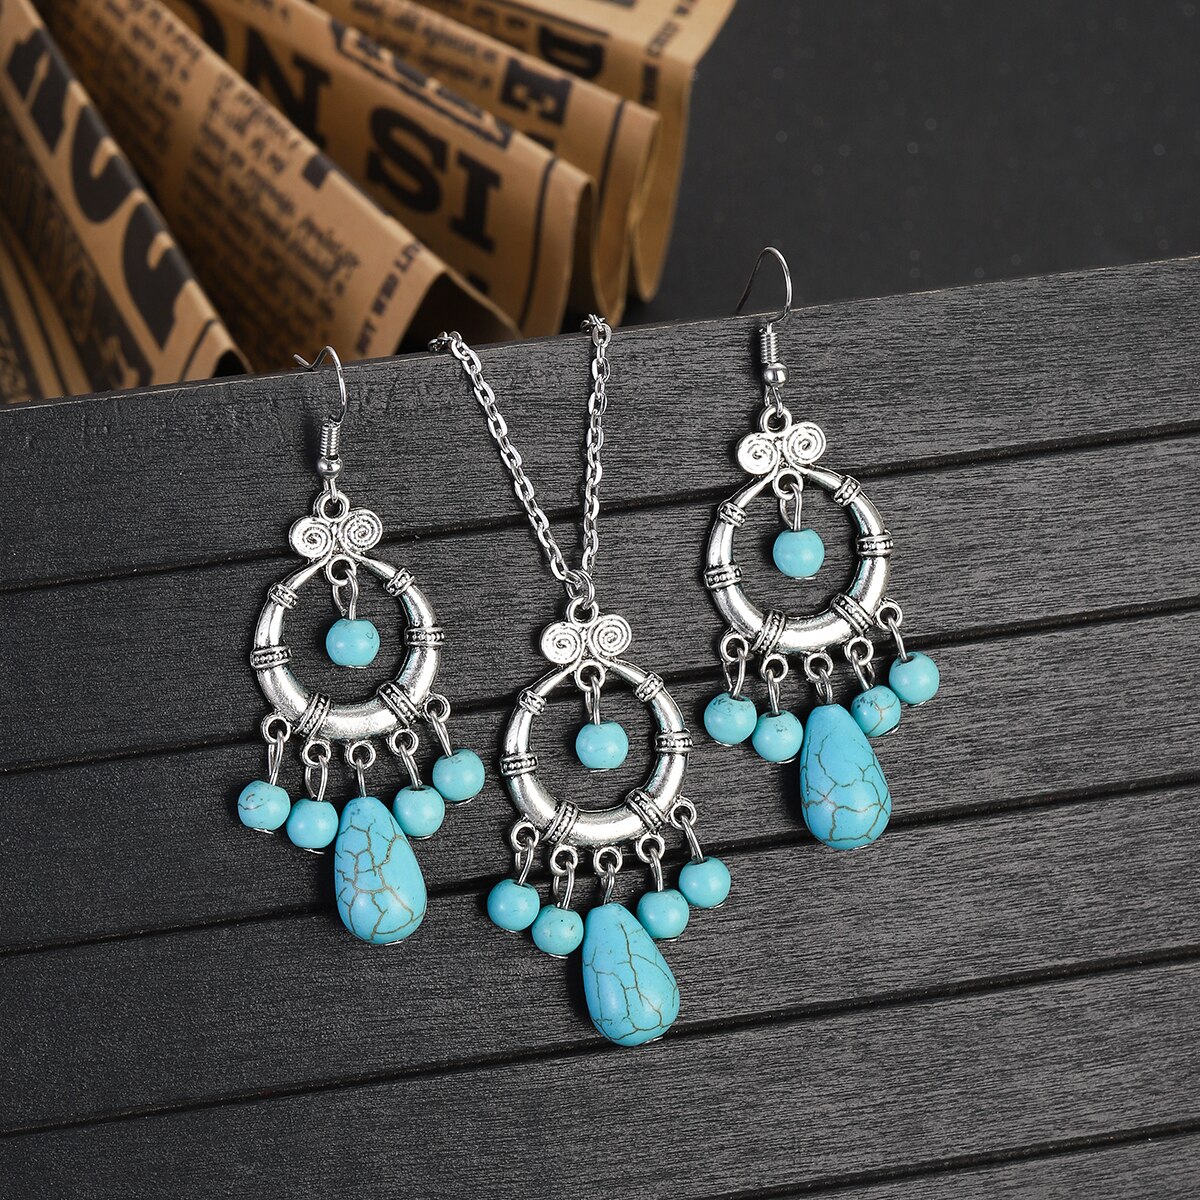 Ethnic-Boho-Blue-Stone-Tassel-Jewelry-Set-Charm-Ladies-Vintage-Jewelry-Silver-Color-Hollow-Flower-Ch-1005005134002231-10